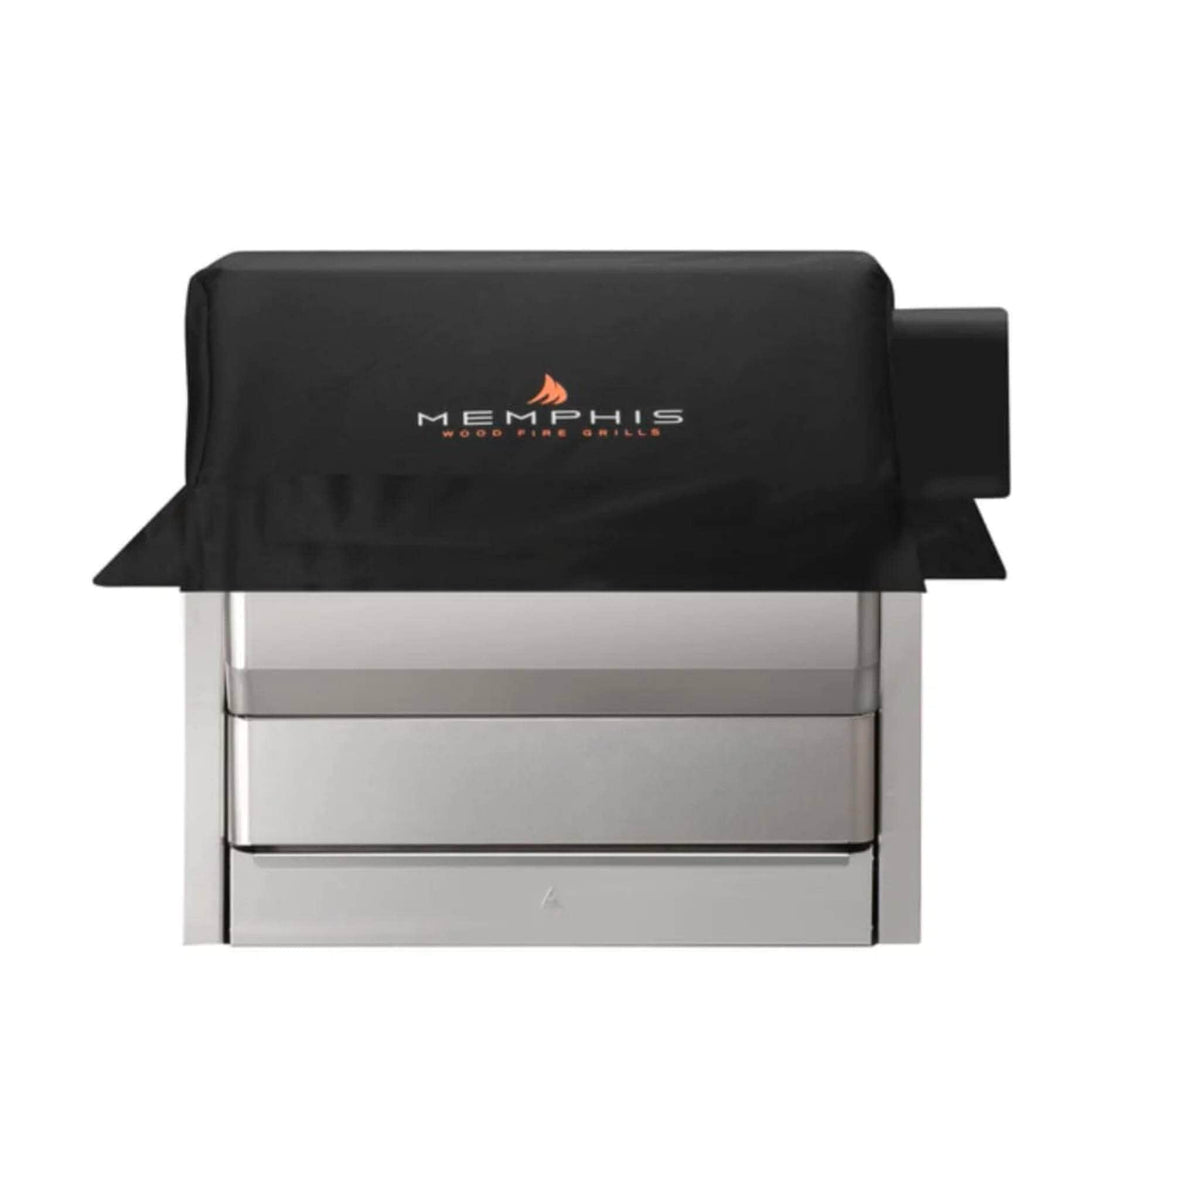 Memphis Grills Pro Built-in ITC 3 Cover